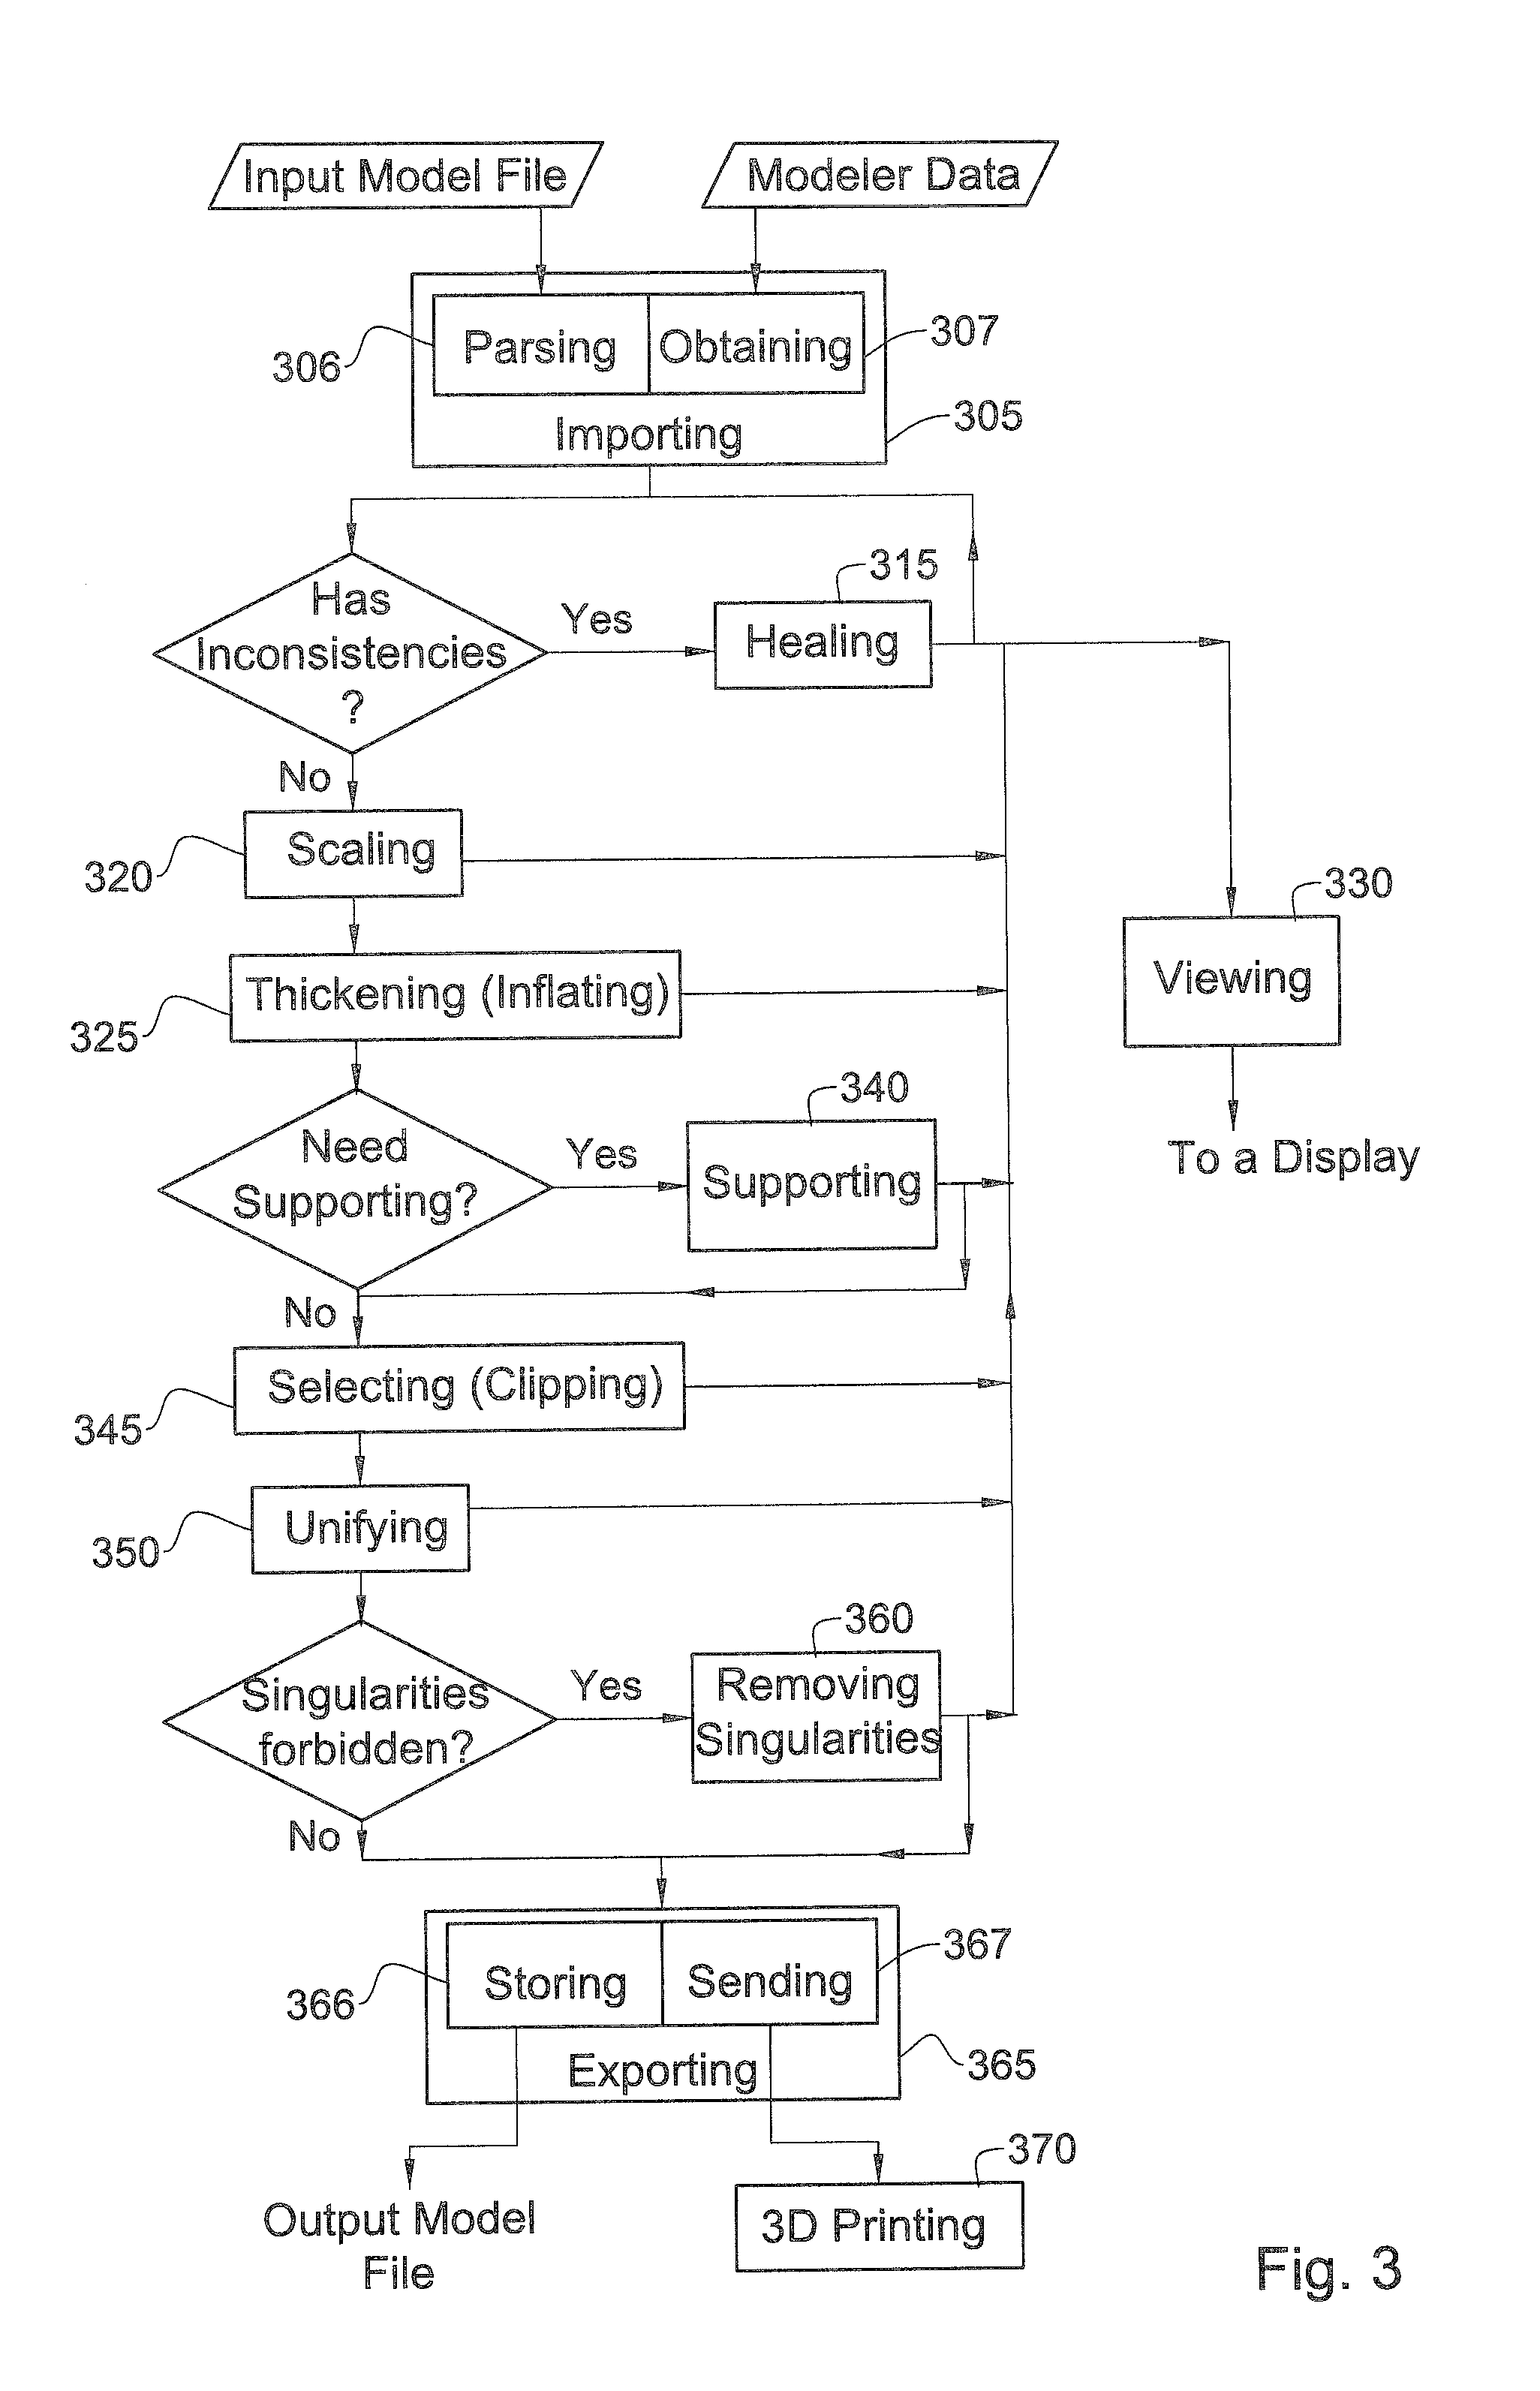 Methods and system for enabling printing three-dimensional object models